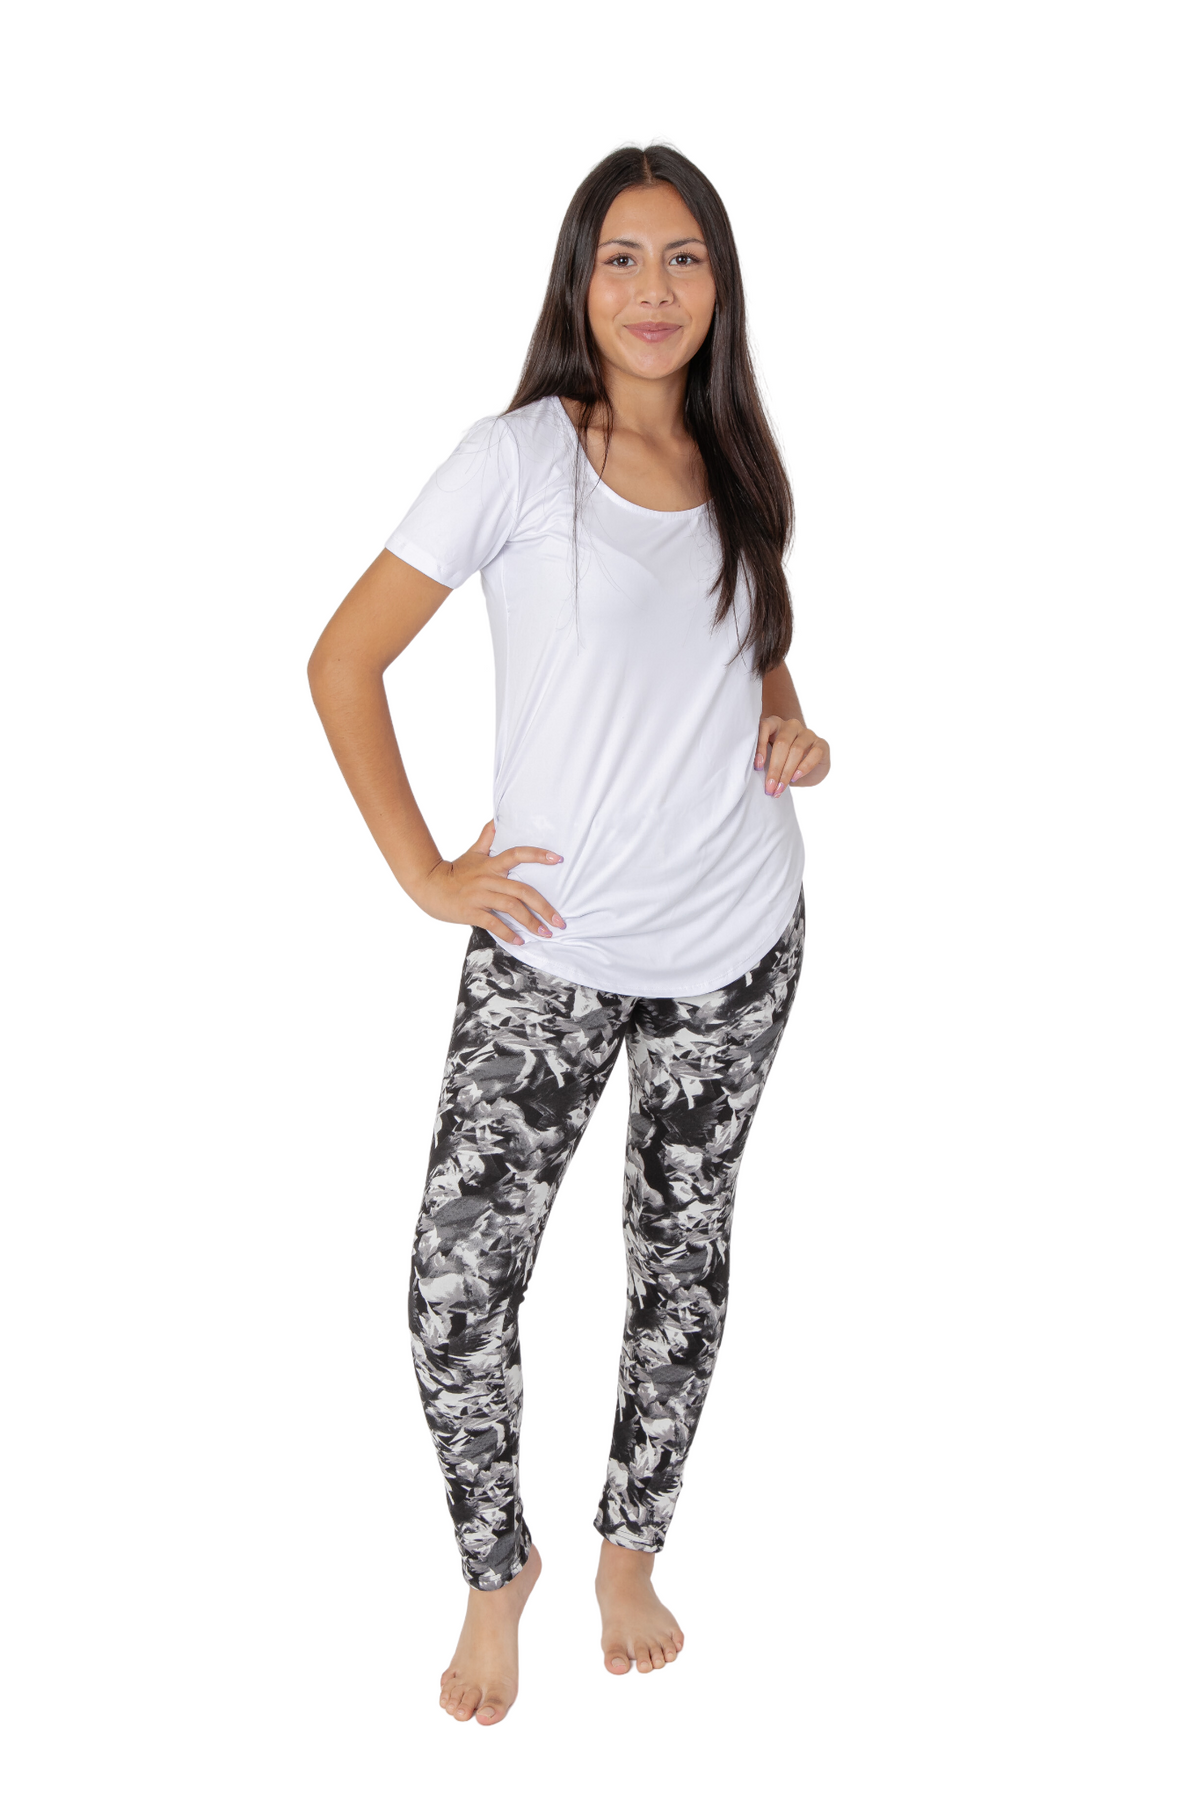 Just Cozy Chic - Cozy Lined Leggings